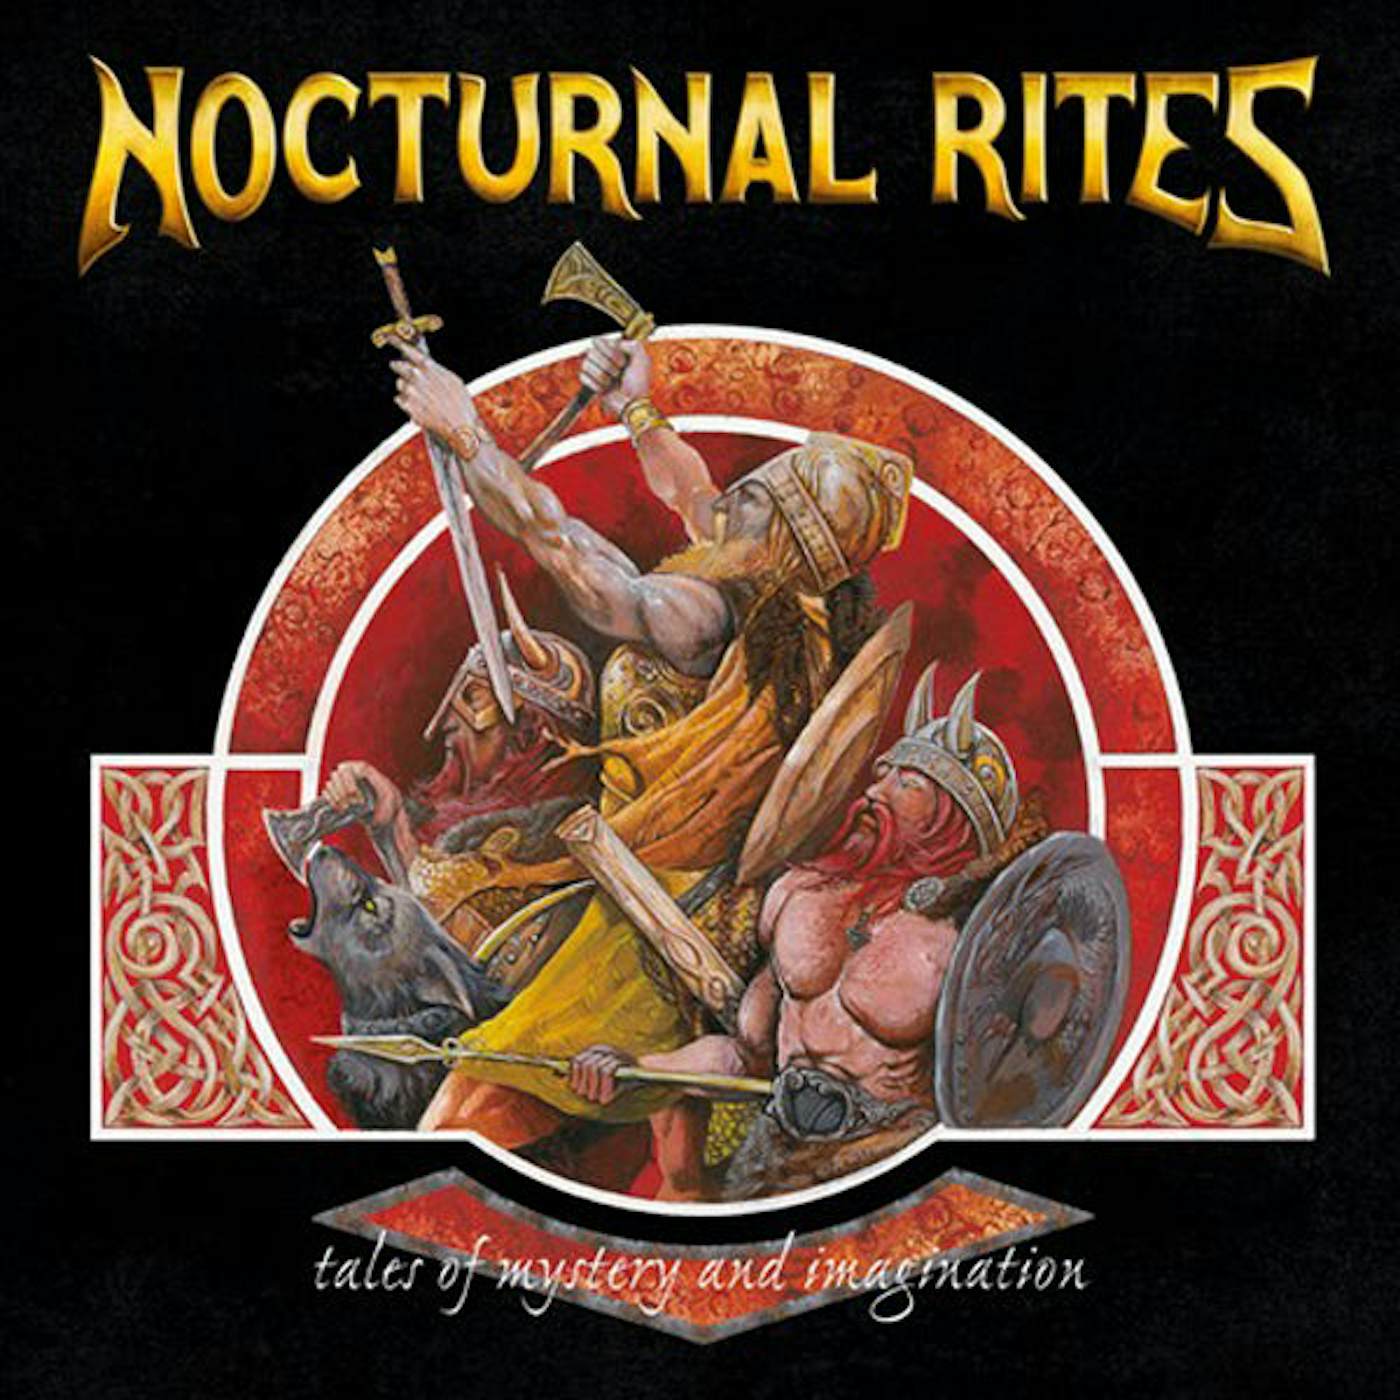 Nocturnal Rites LP - Tales Of Mystery And Imagination (Vinyl)